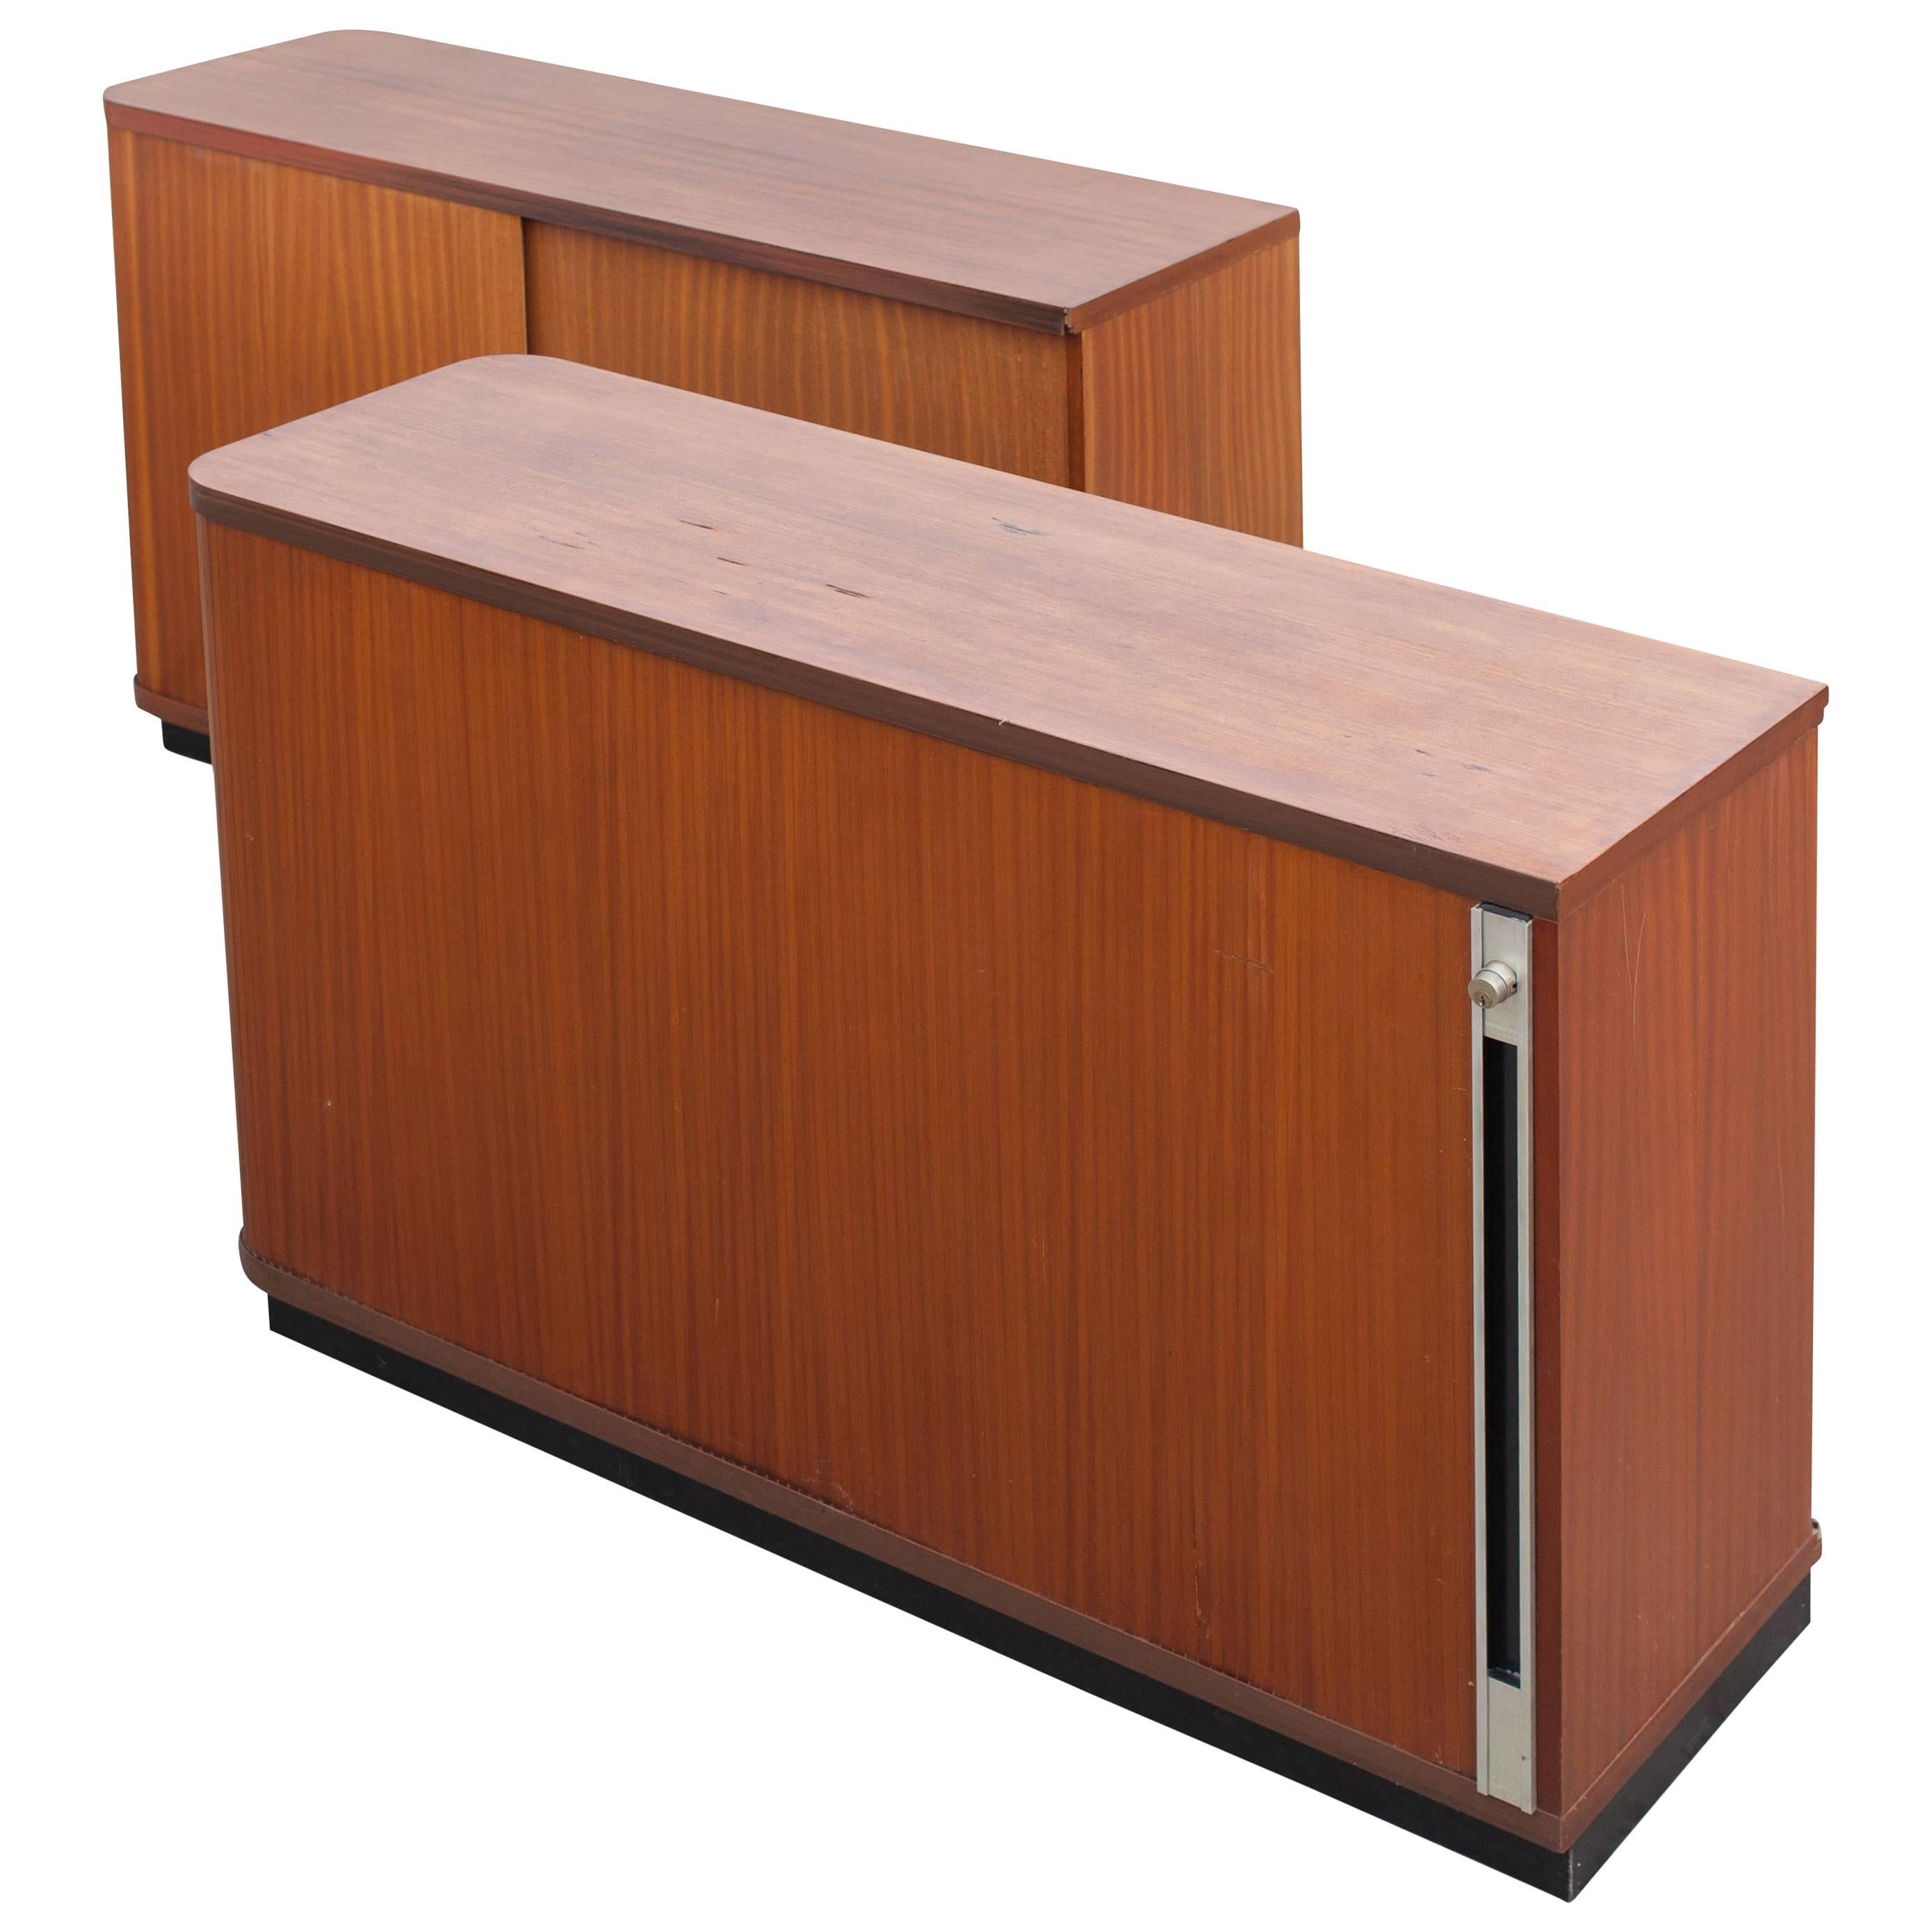 Florence Knoll style set of two teak office sideboards with tambour doors.

Can be used as room dividers since the back are also finished in teak. 
The cabinets are equipped with sliding doors, several shelves, and locks.

Measures: W 125, D